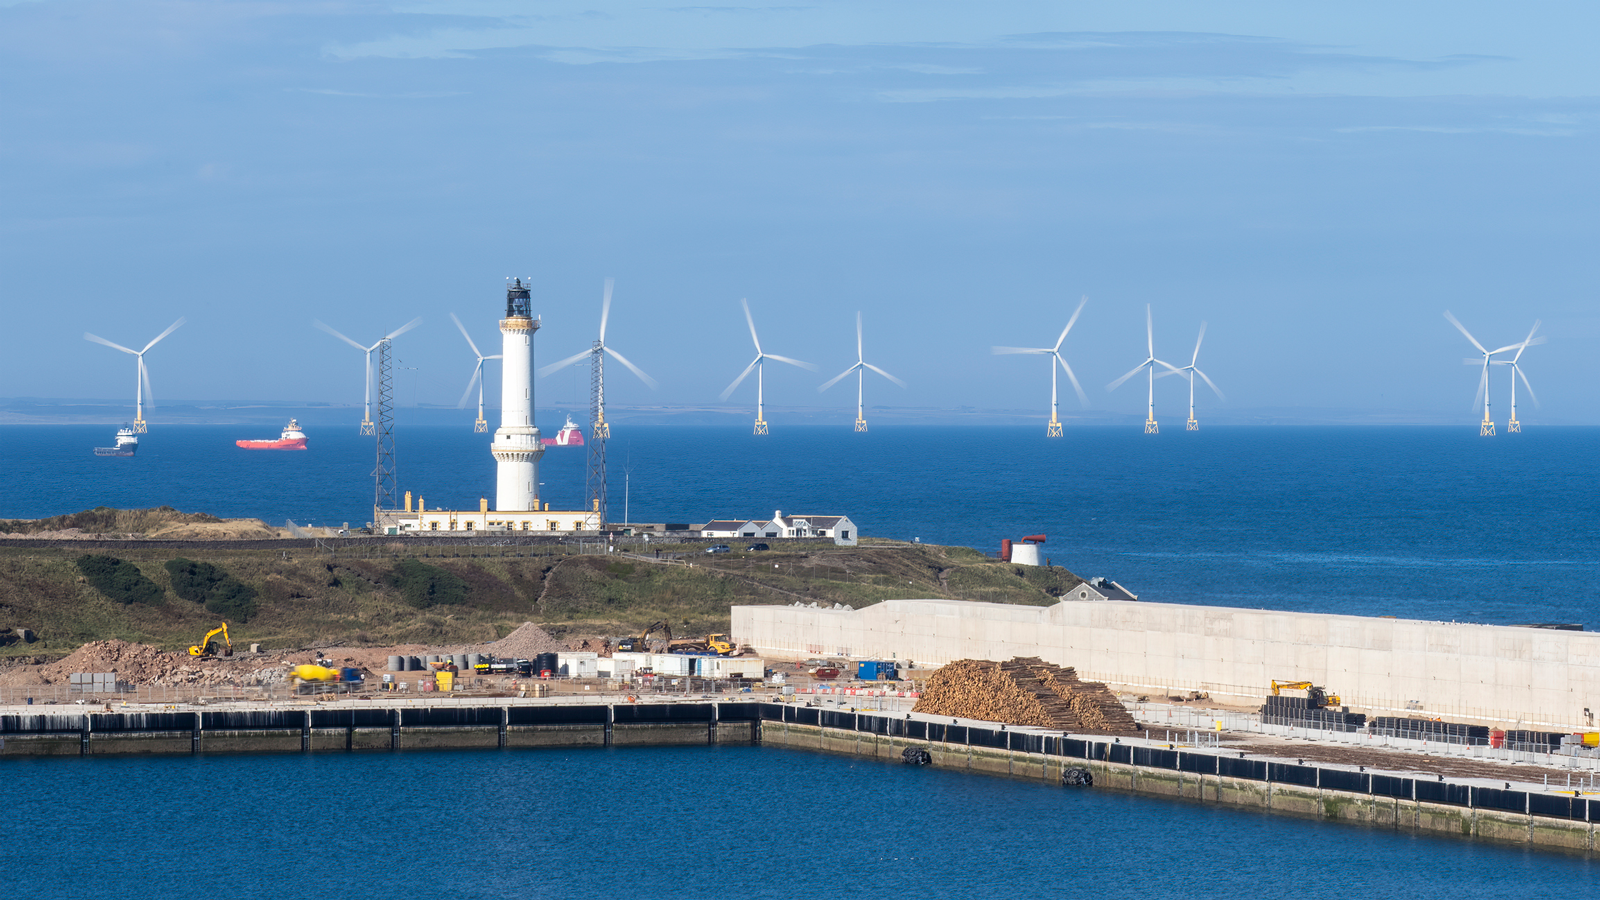 The UK is running out of options for a ‘just and fair’ offshore energy transition, says report